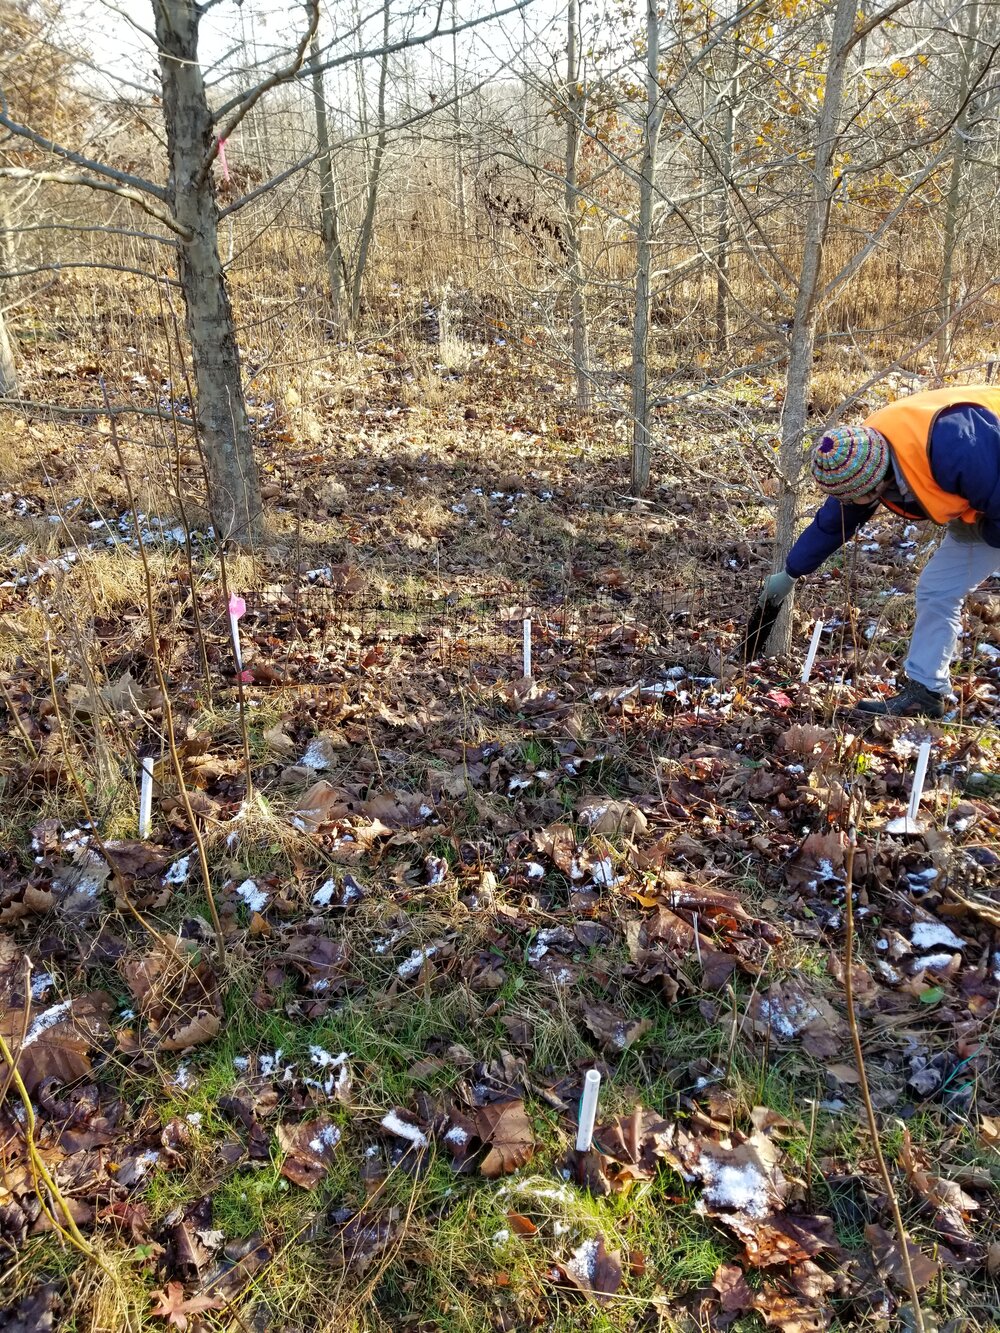  Here I am surrounding a quadrat with deer fencing to separate the litter treatments and prevent leaves from blowing away. 